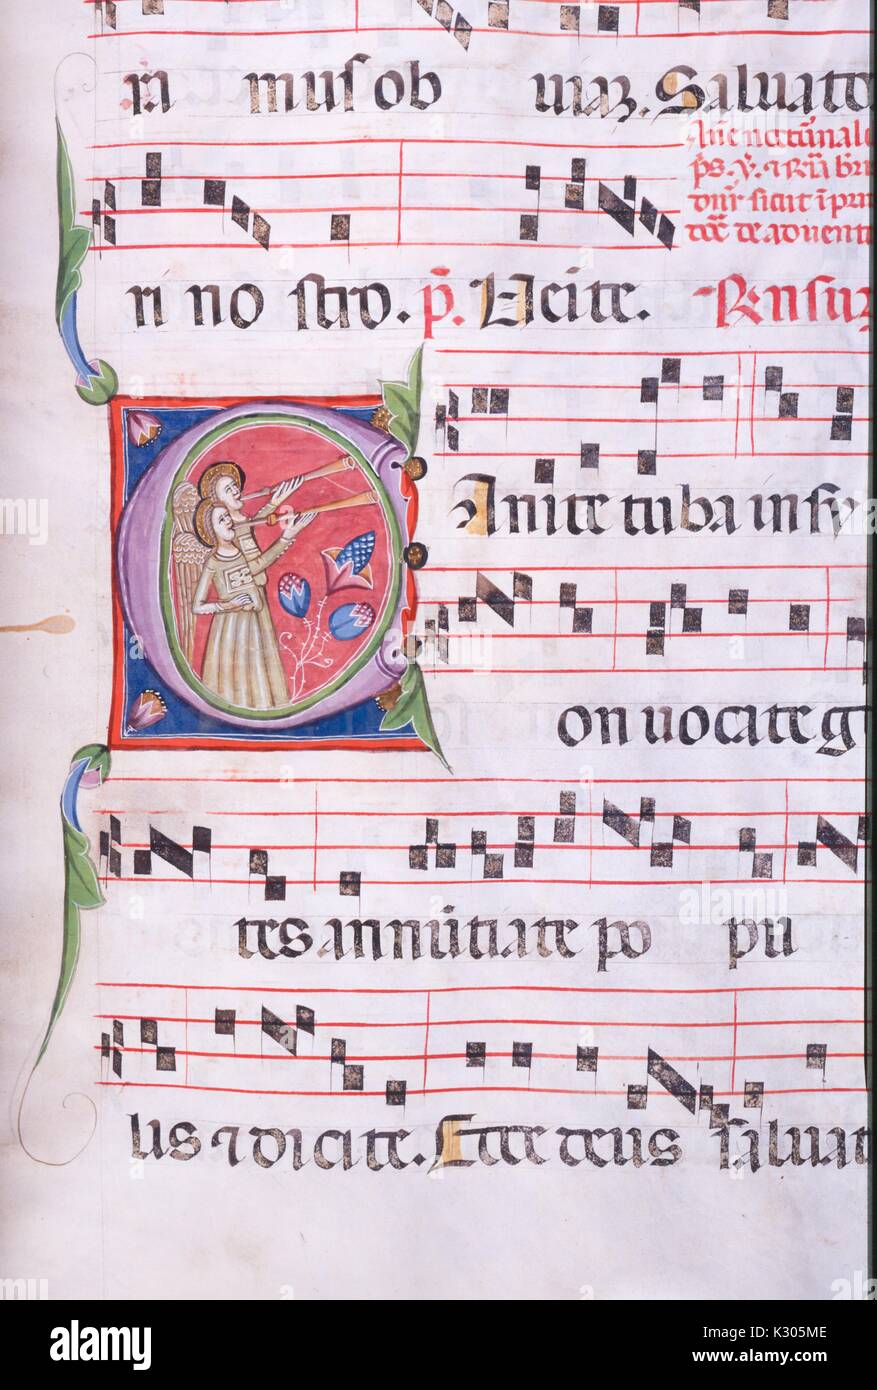 Illuminated manuscript page of song with angels playing horns, from the 'Incipit antiphonarium nocturnum, ' a 15th century Latin antiphonary from the Catholic Church, 2013. Stock Photo